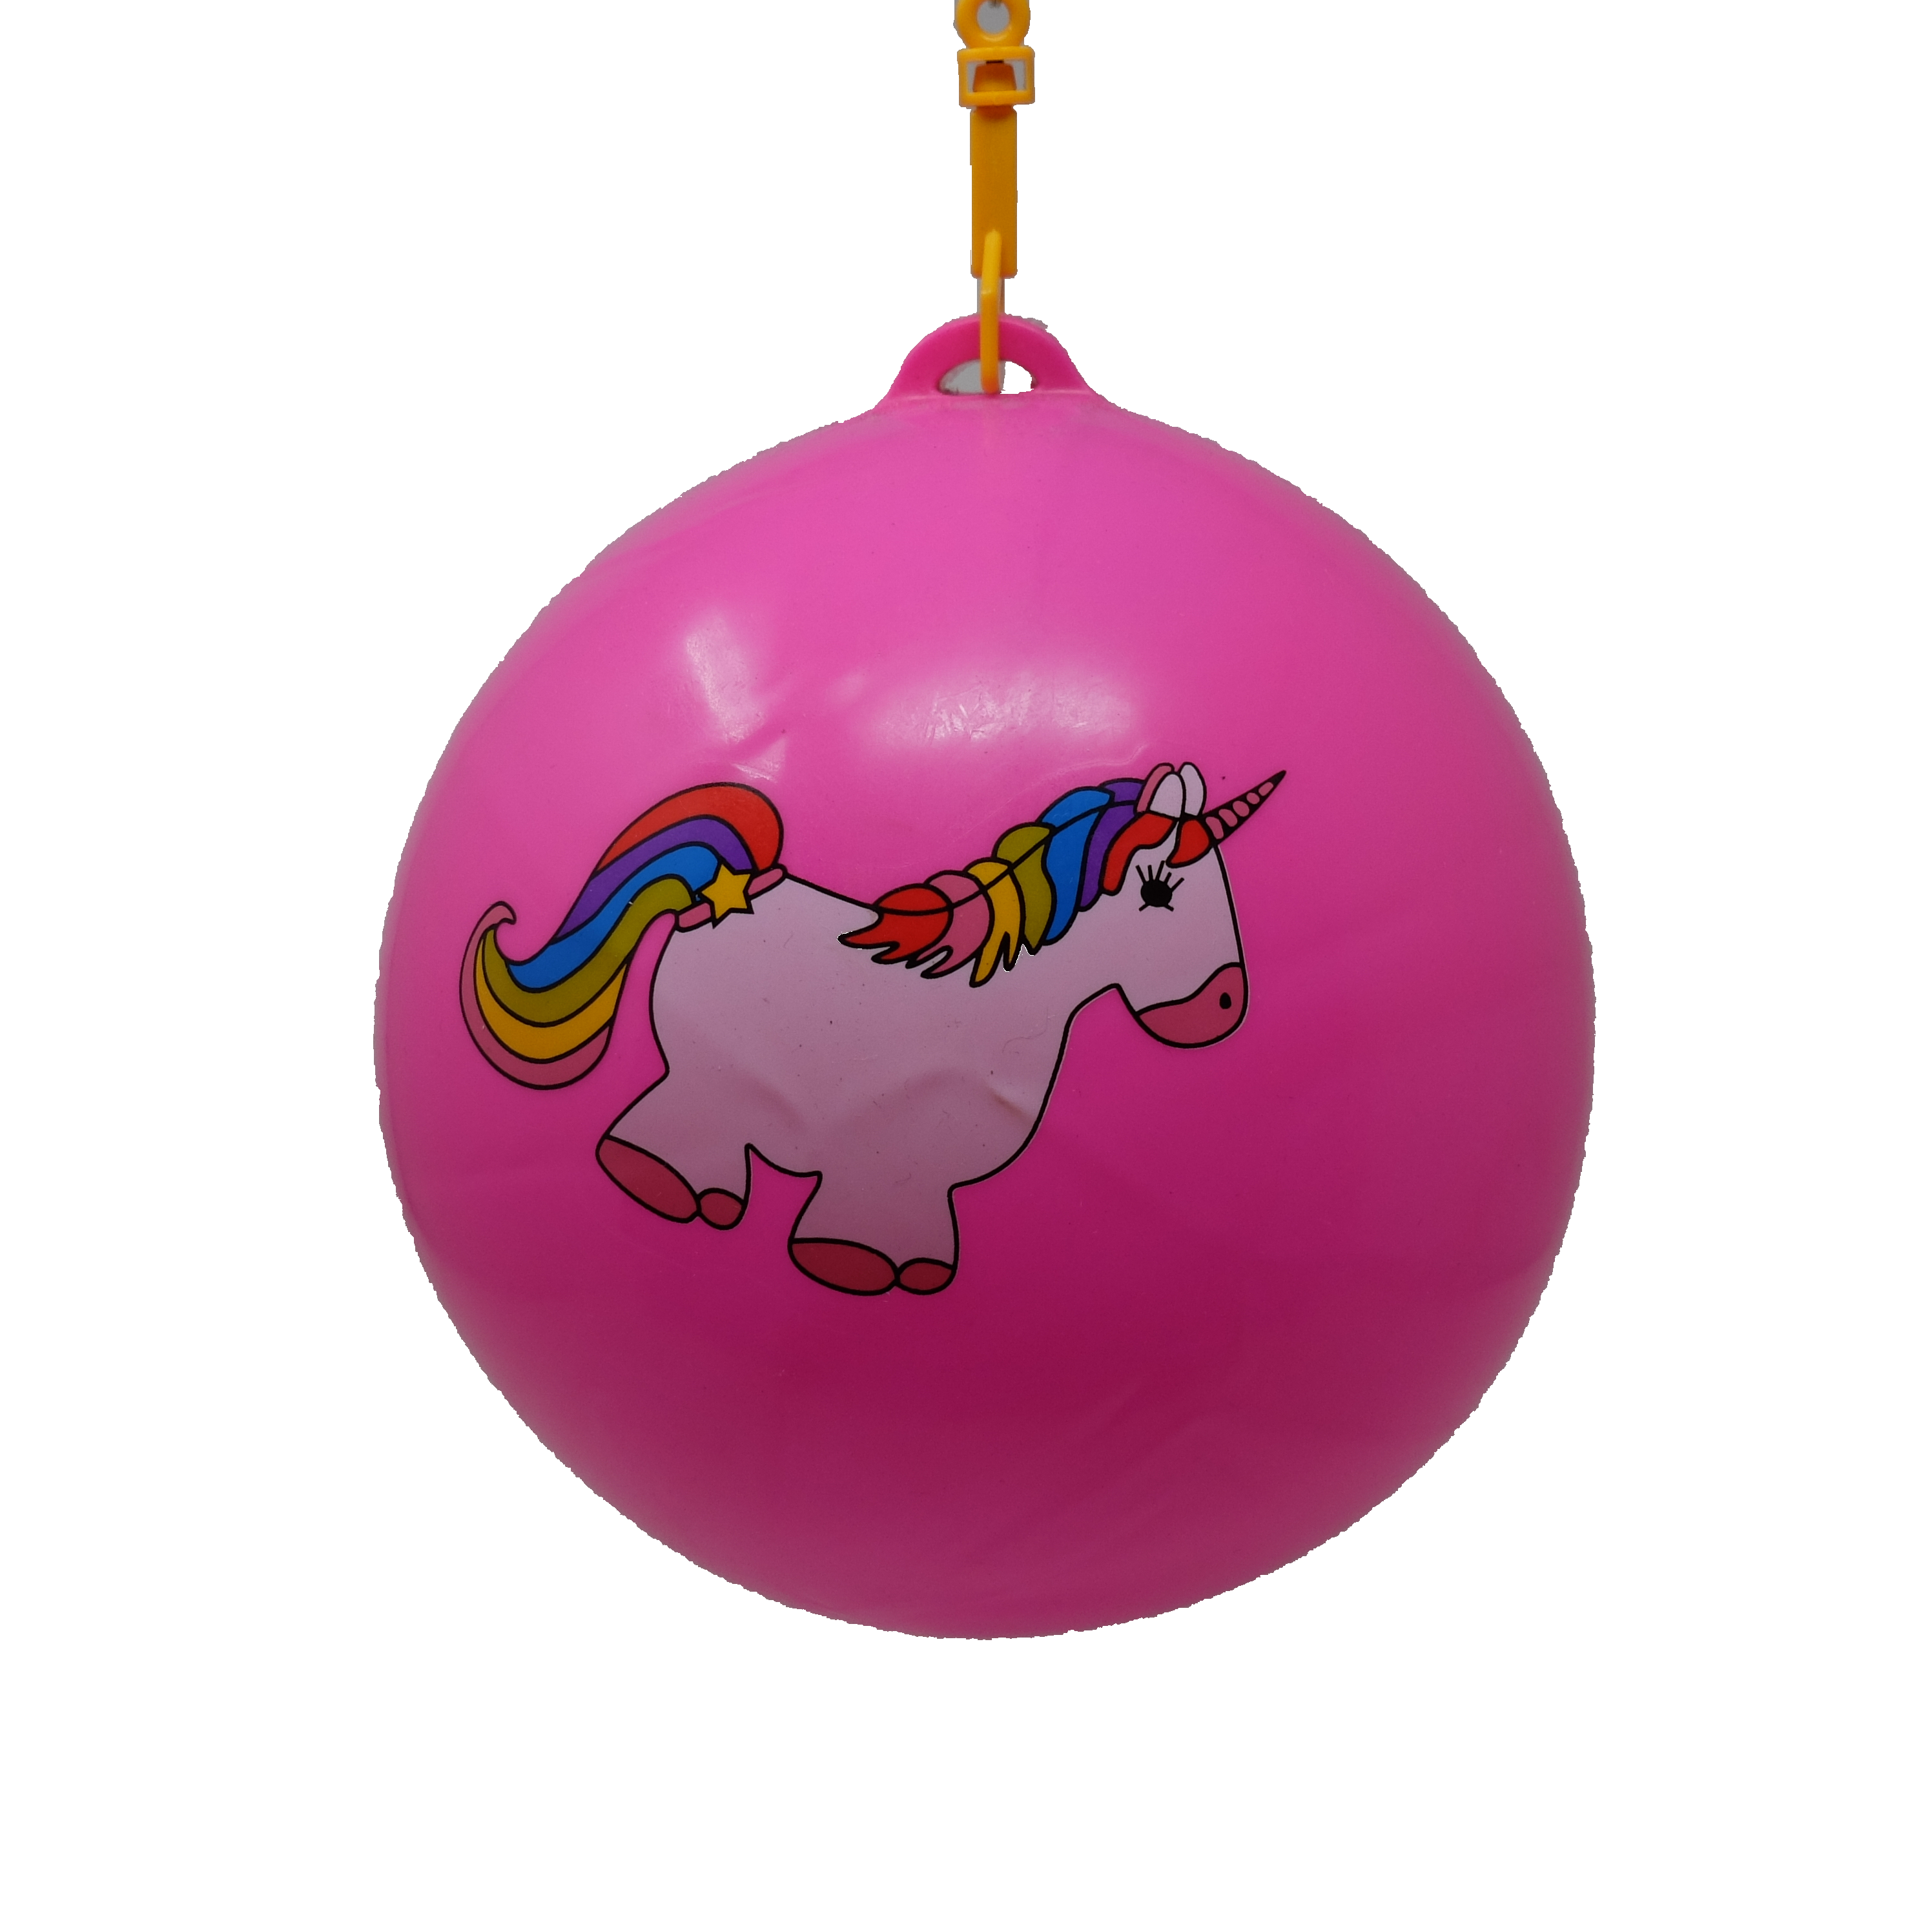 Unicorn ball on spring key chain outdoor ball game 